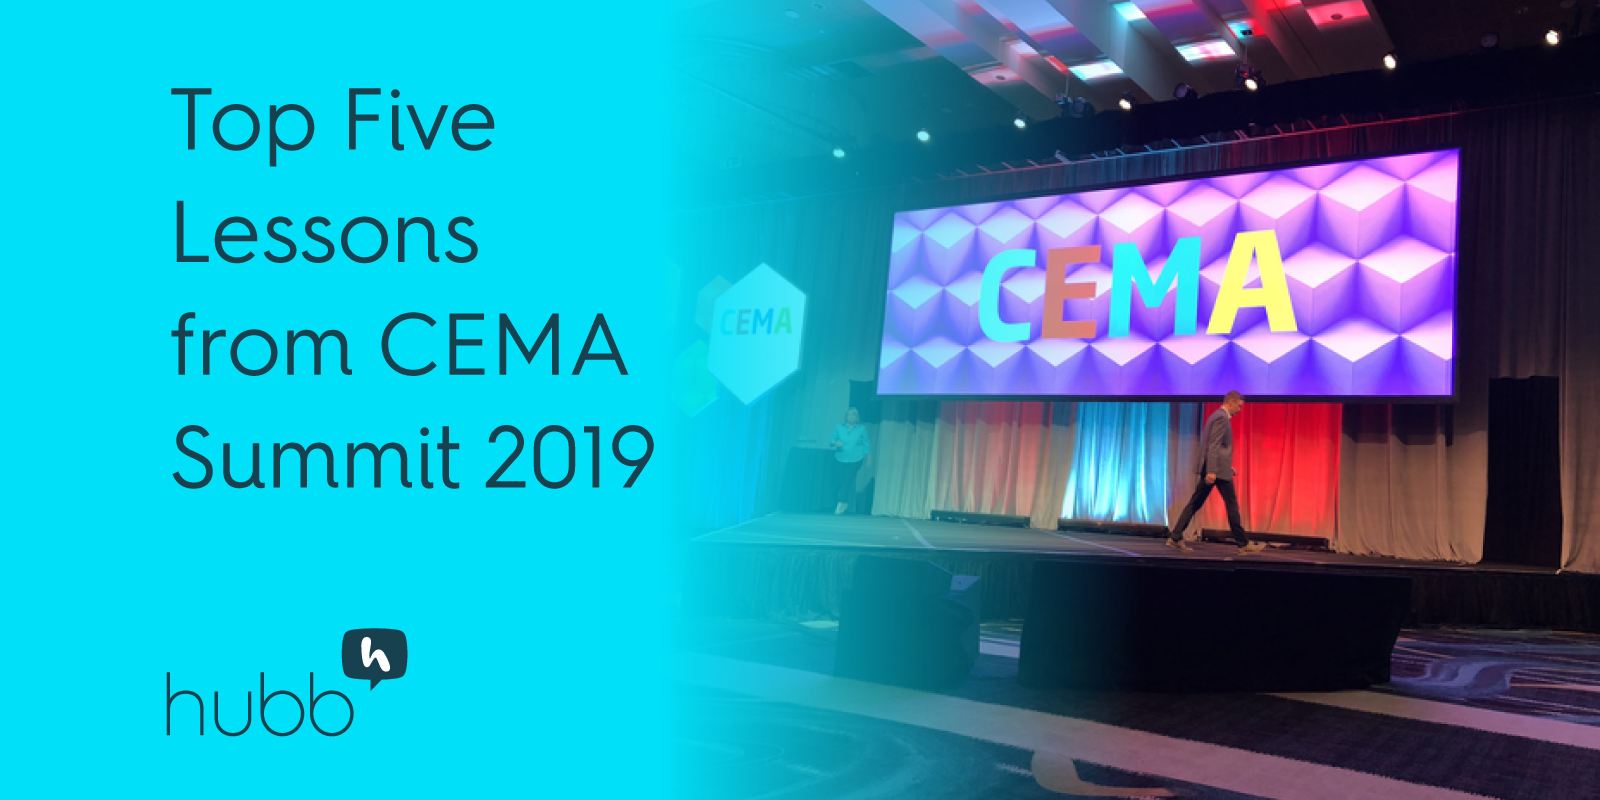 Top Five Lessons from CEMA Summit 2019